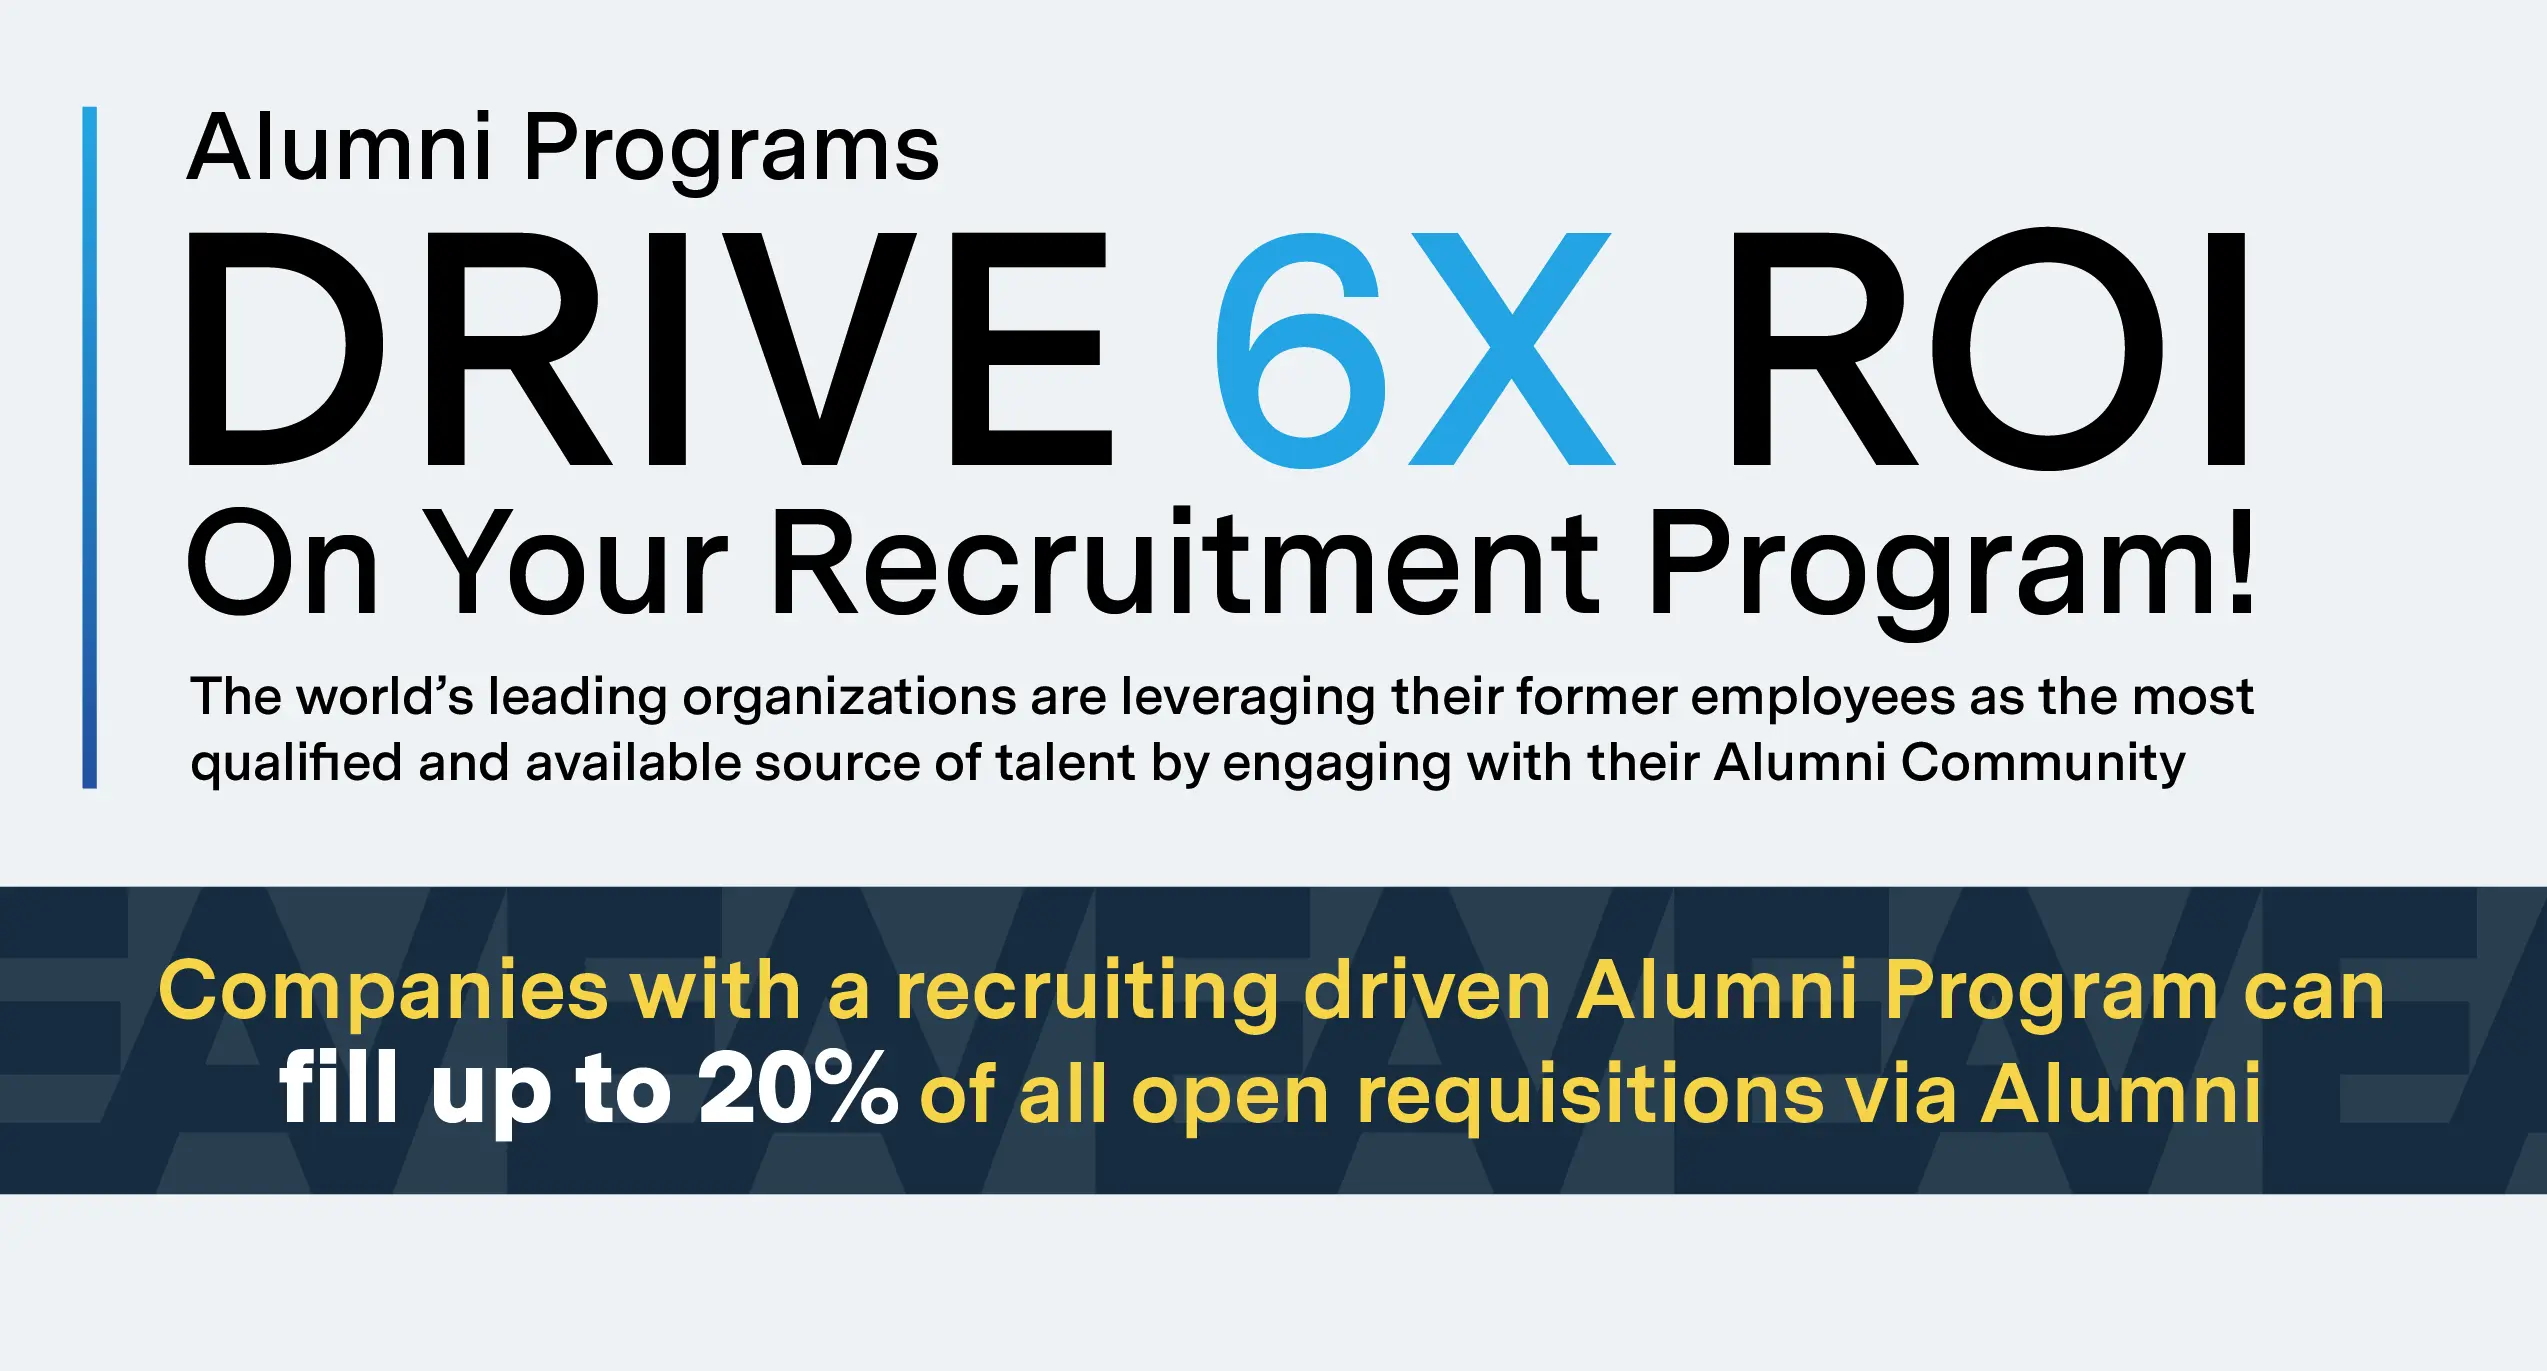 Corporate Alumni Programs: Impact On Your Global Recruiting Strategy